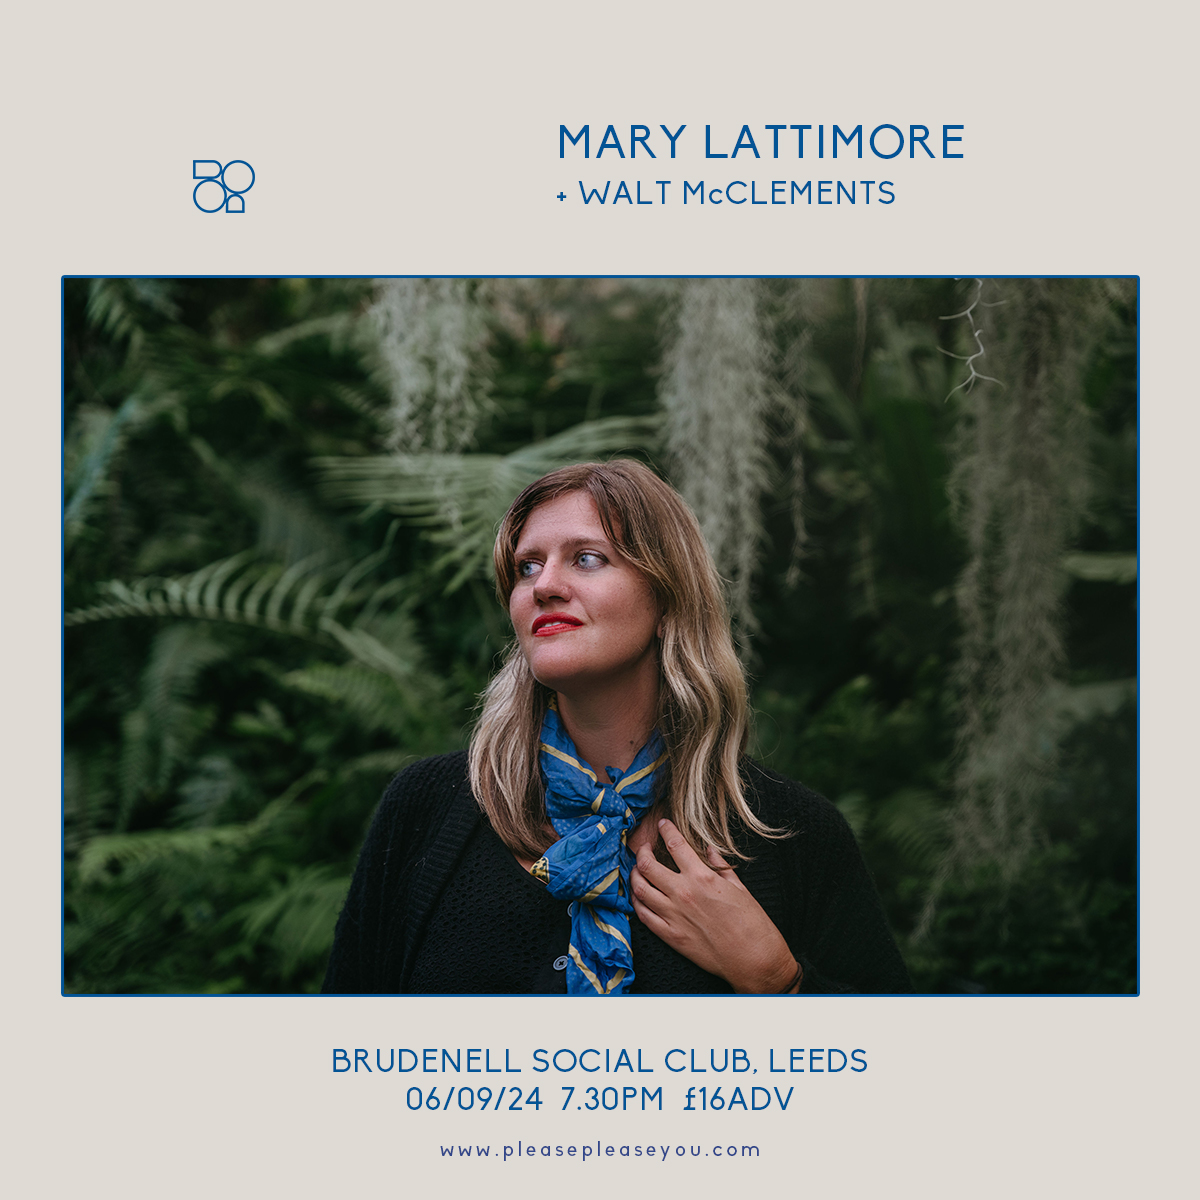 'Rain On The Road' - the new record from @marylattimore & Walt McClements is OUT TODAY and sounding stunning. ✨ She returns to The Brudenell this September + support from collaborator Walt McClements 🙌 On sale now! 👇 🤝 @PleasePleaseYou 🤝 ➡️ bit.ly/MaryLattimore-…